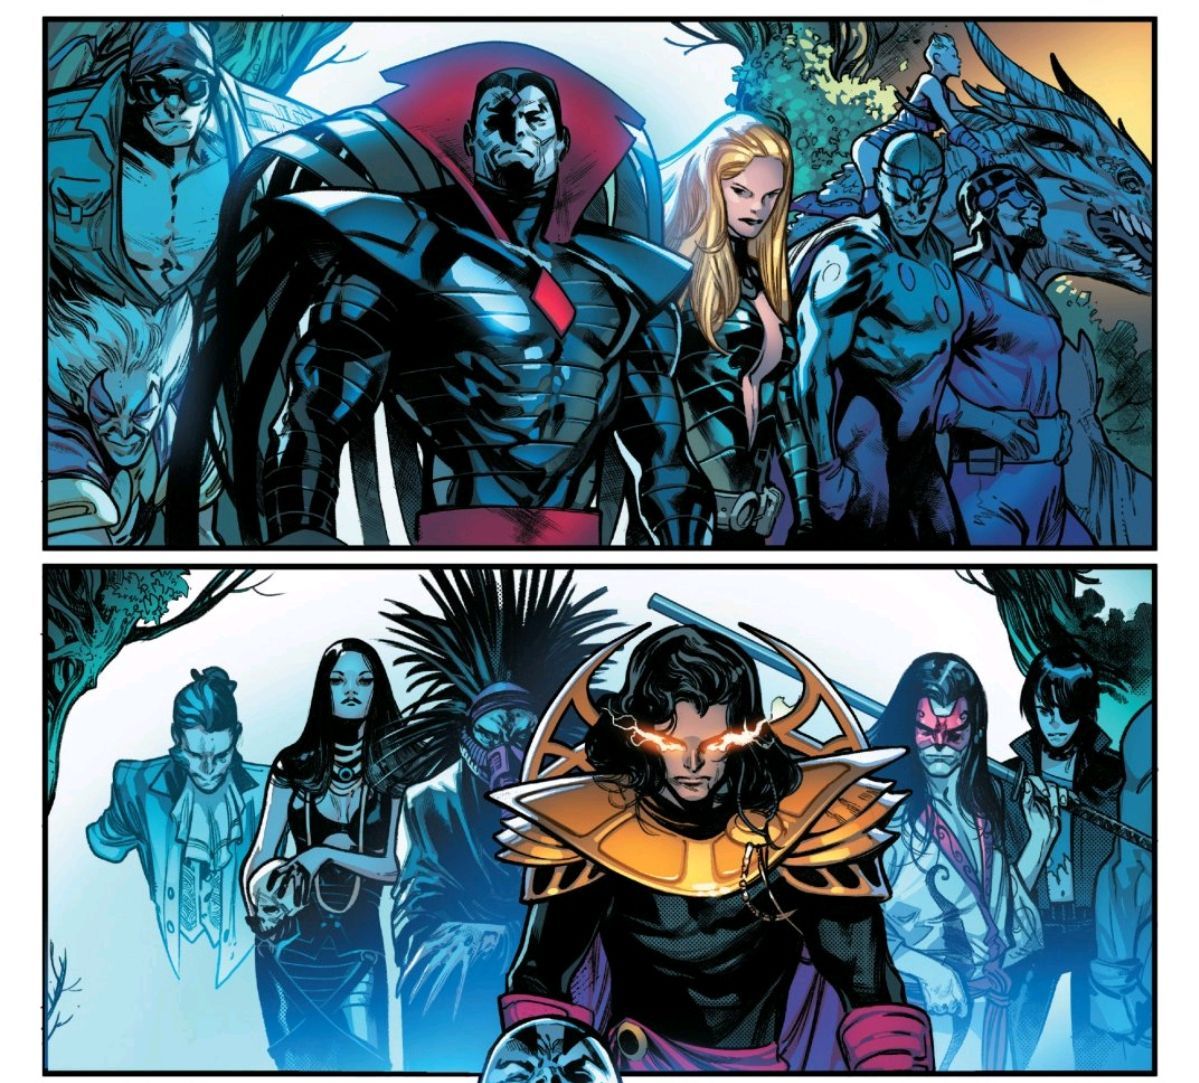 image of X-Men villains from House of X #5